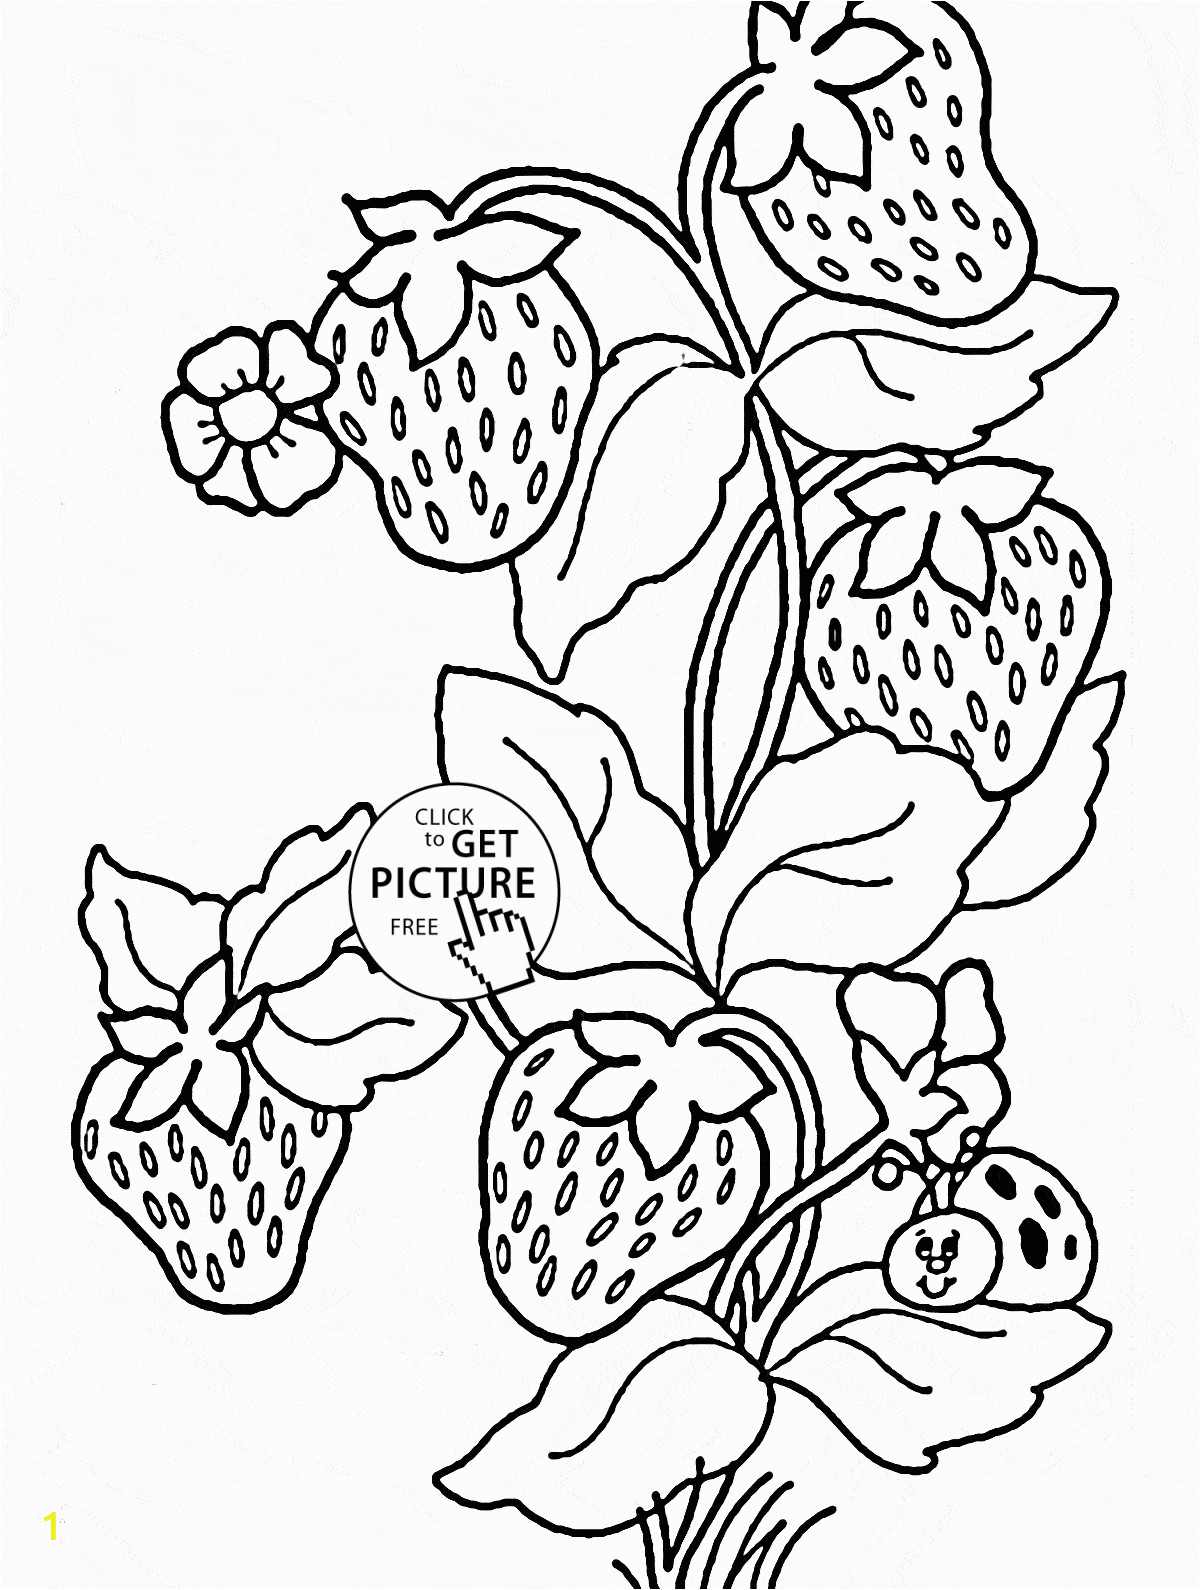 Printable Fruit Coloring Pages Ladybug and Strawberries Coloring Page for Kids Fruits